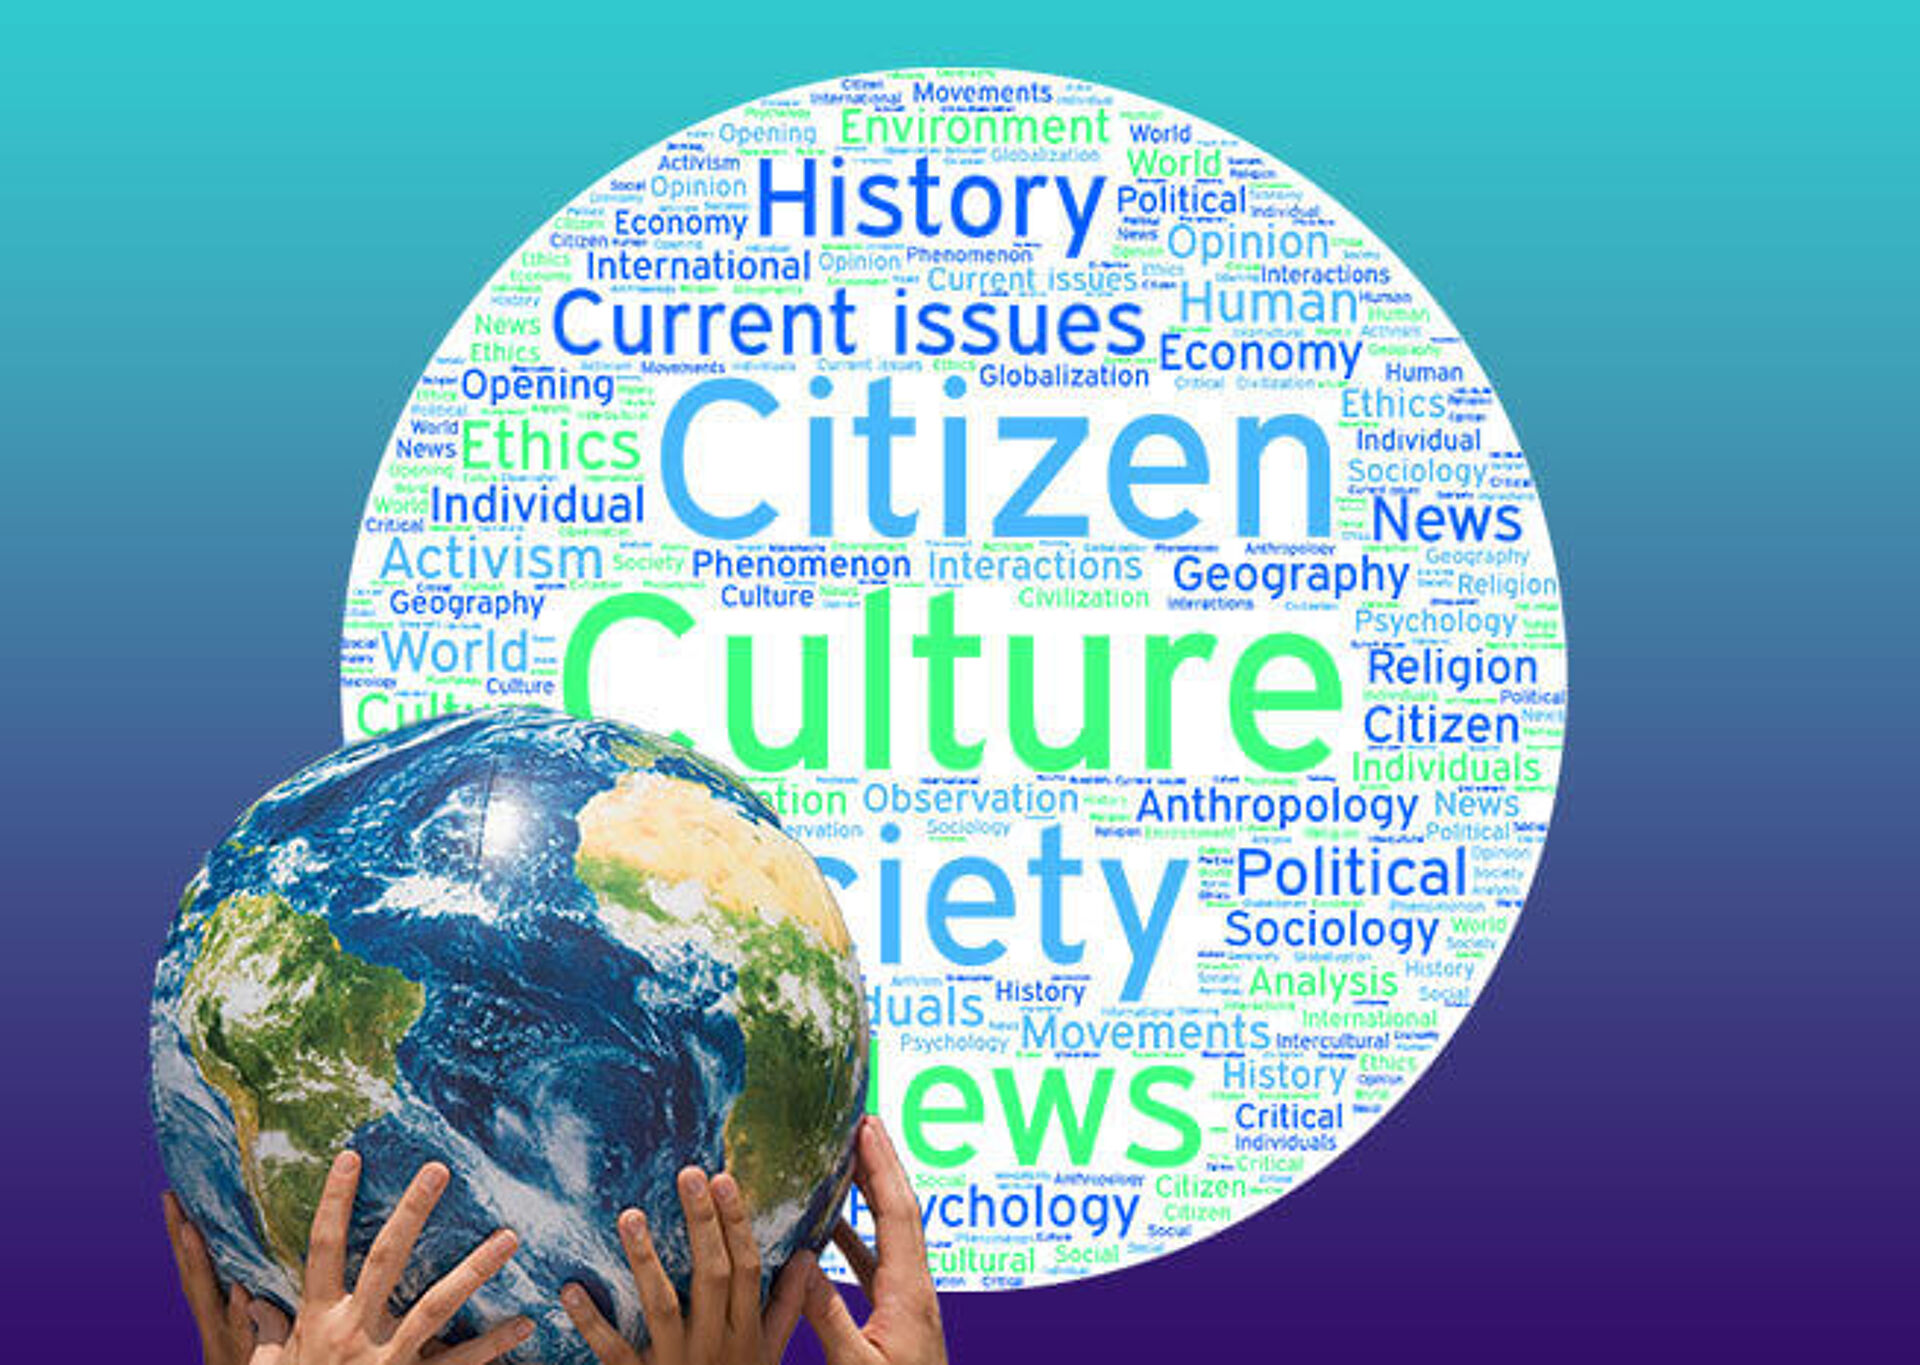 Hands holding a globe with a cultural and societal themed word cloud encompassing it.